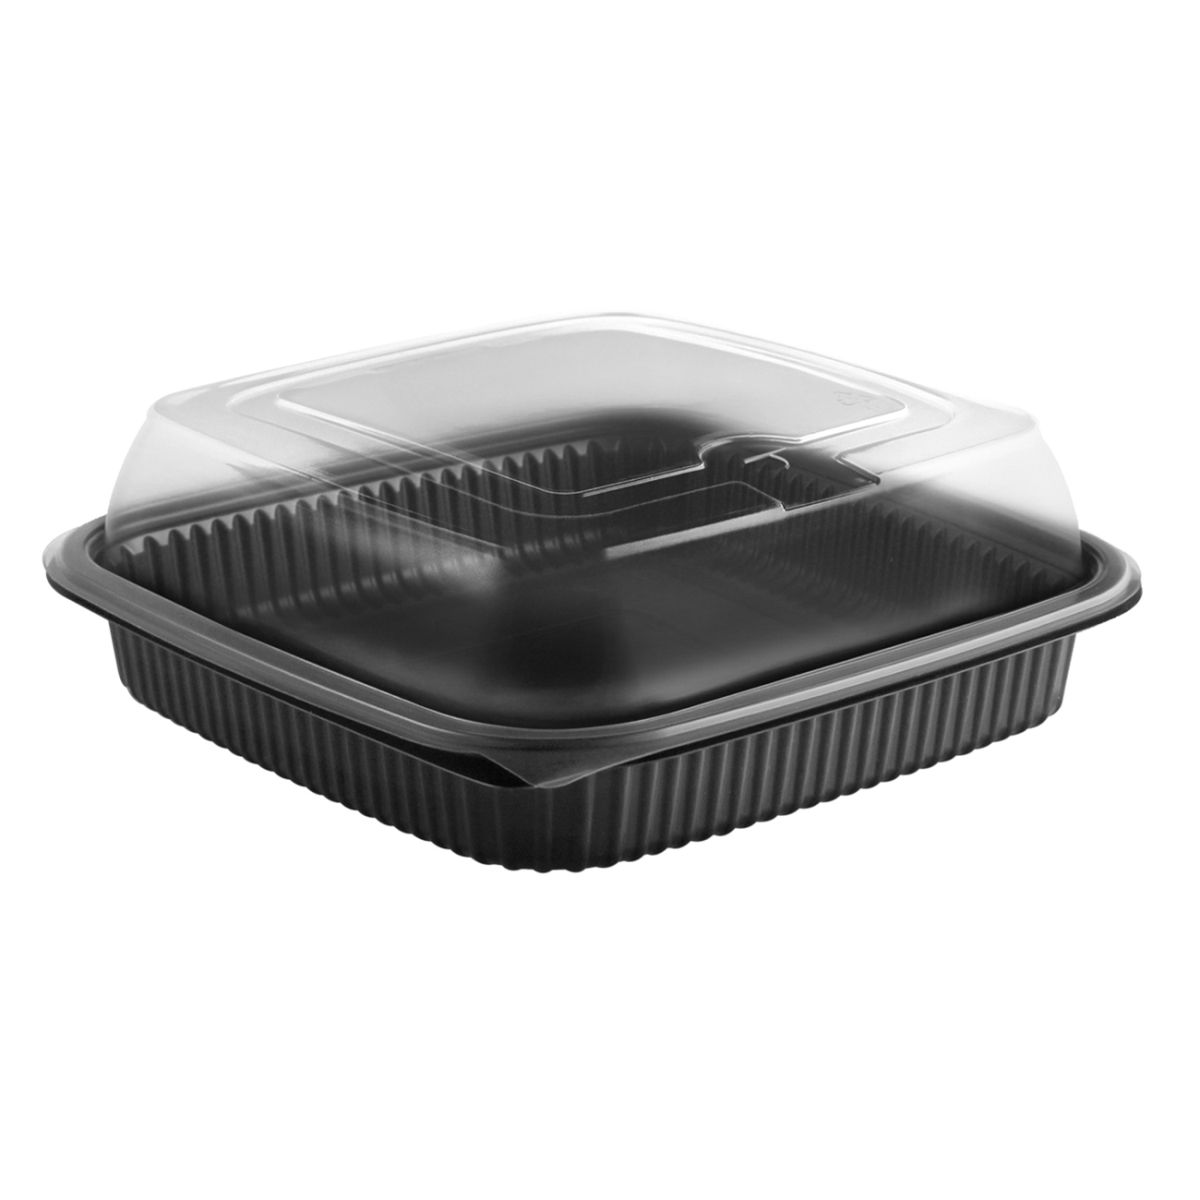 Anz4118515 Cdcs85321-hd Microraves Container, Black